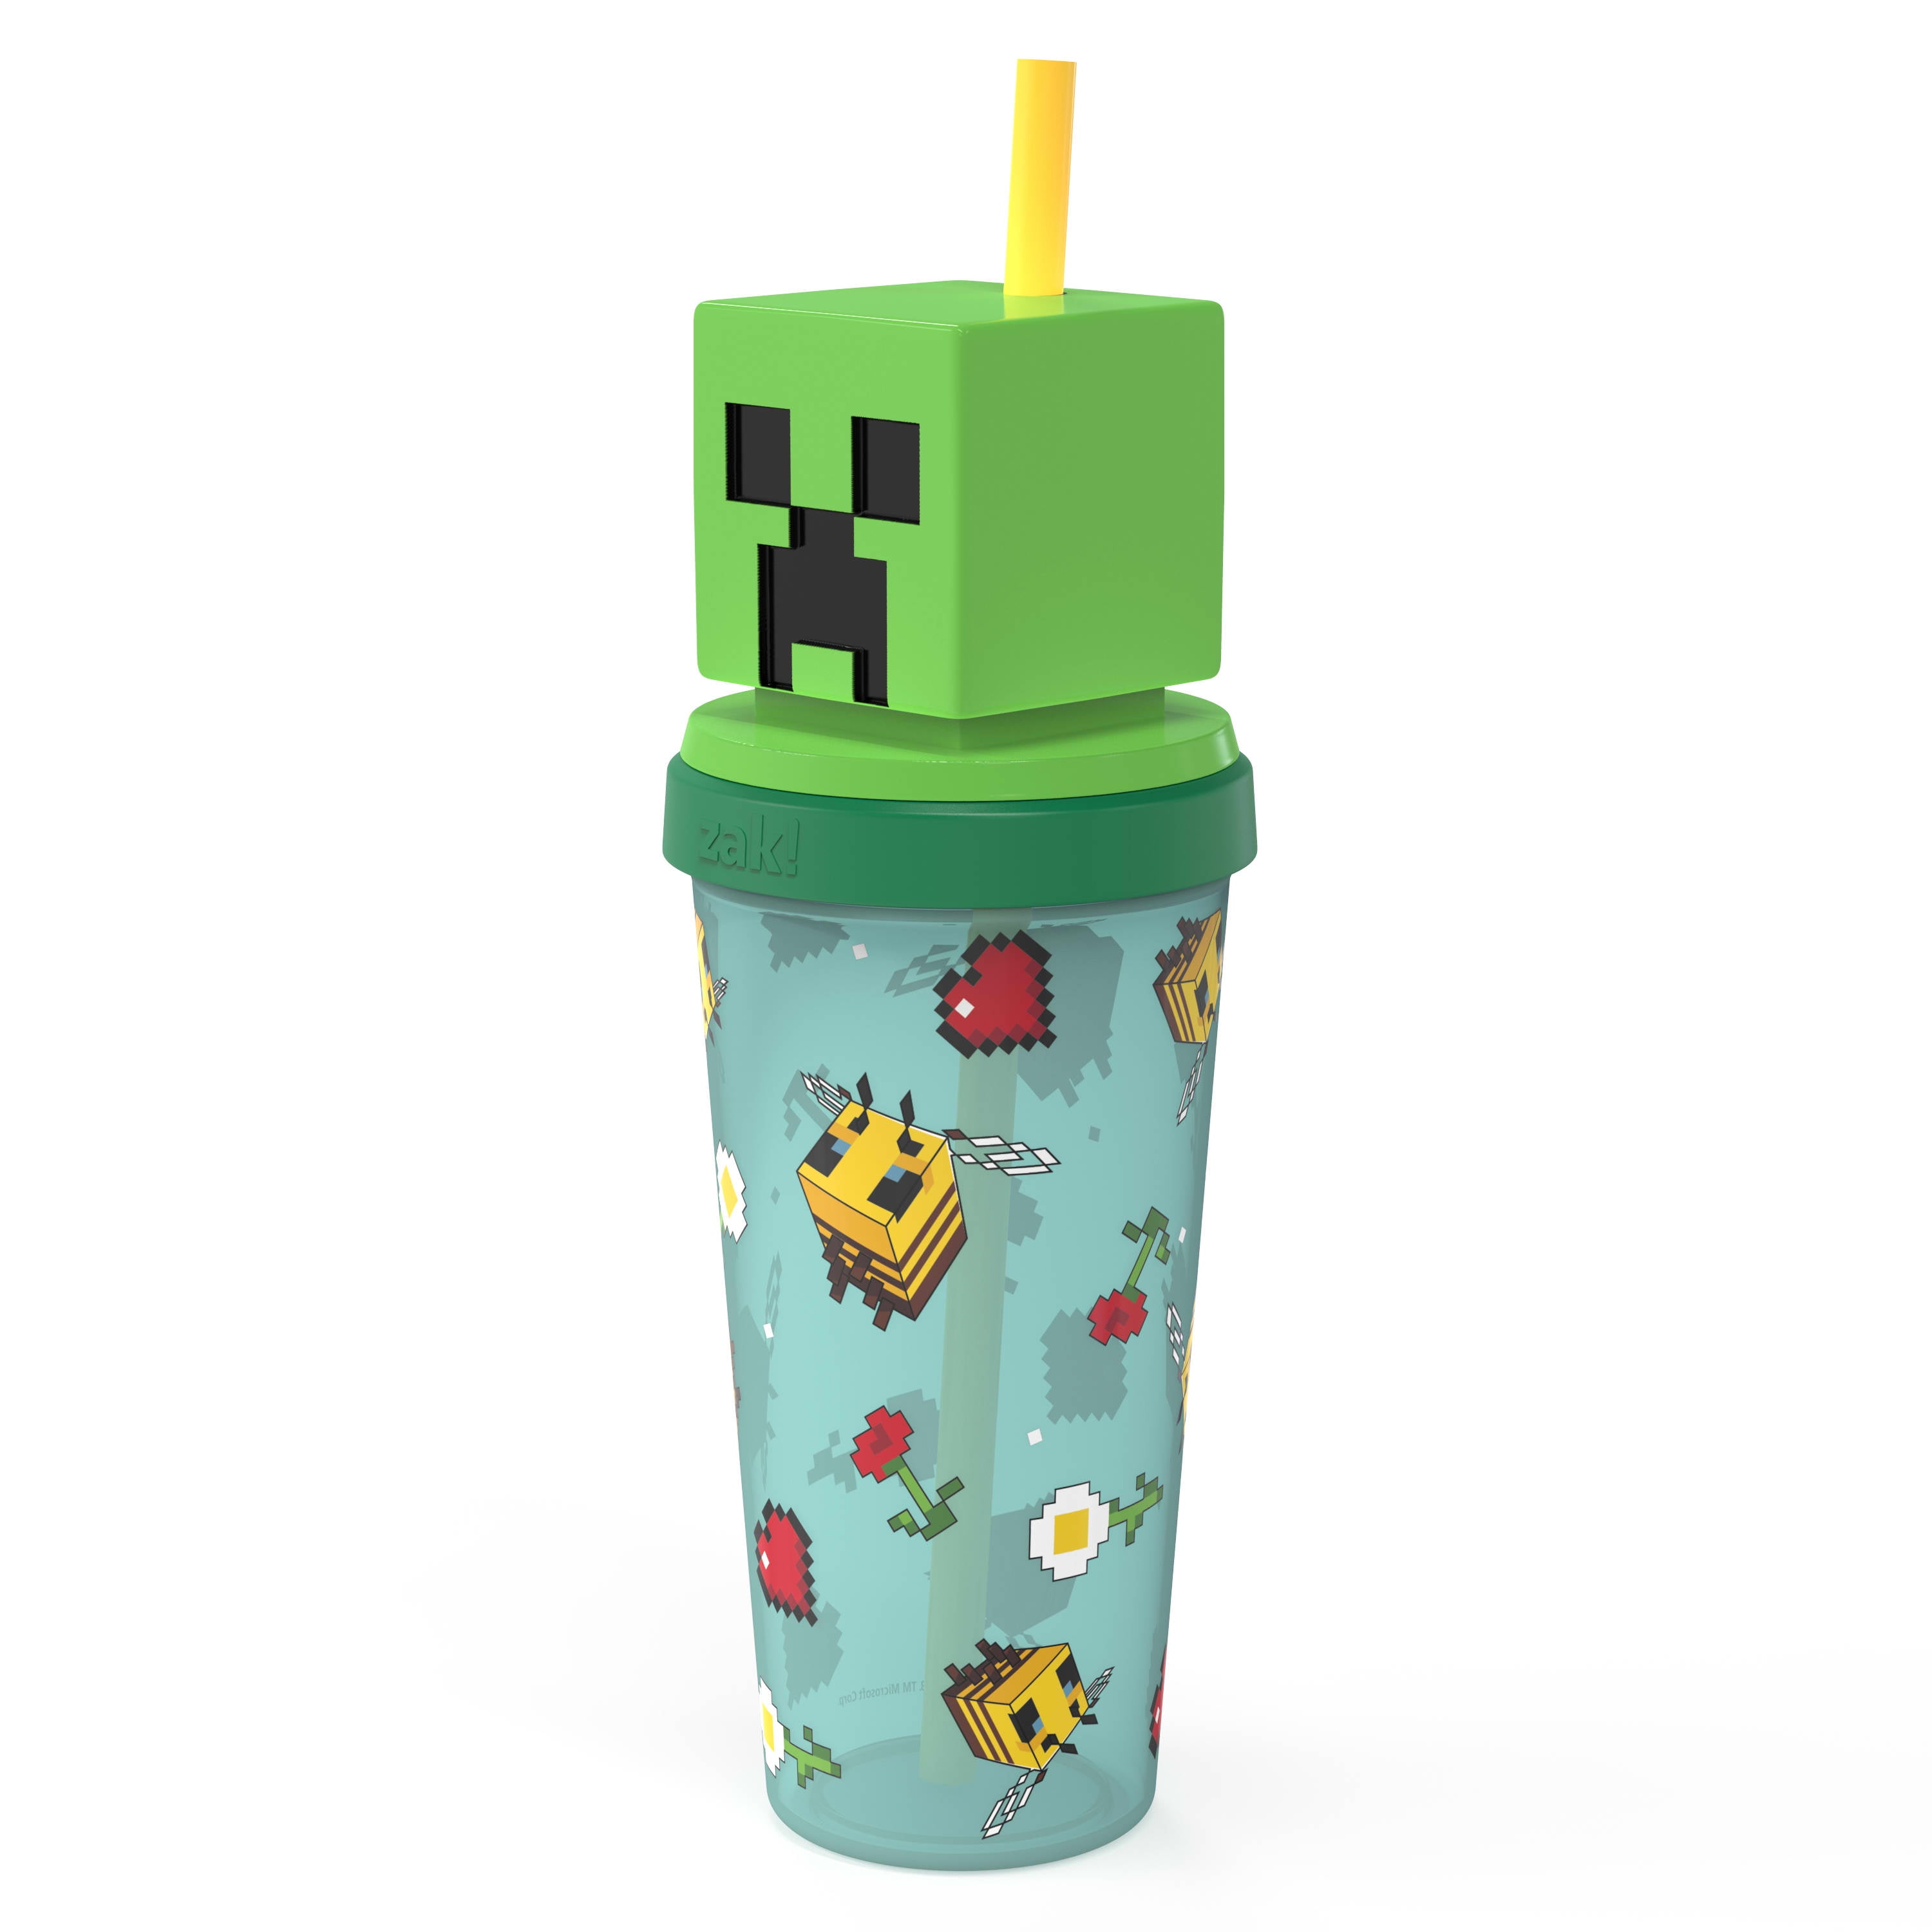 Minecraft Tumbler – SMG Creations